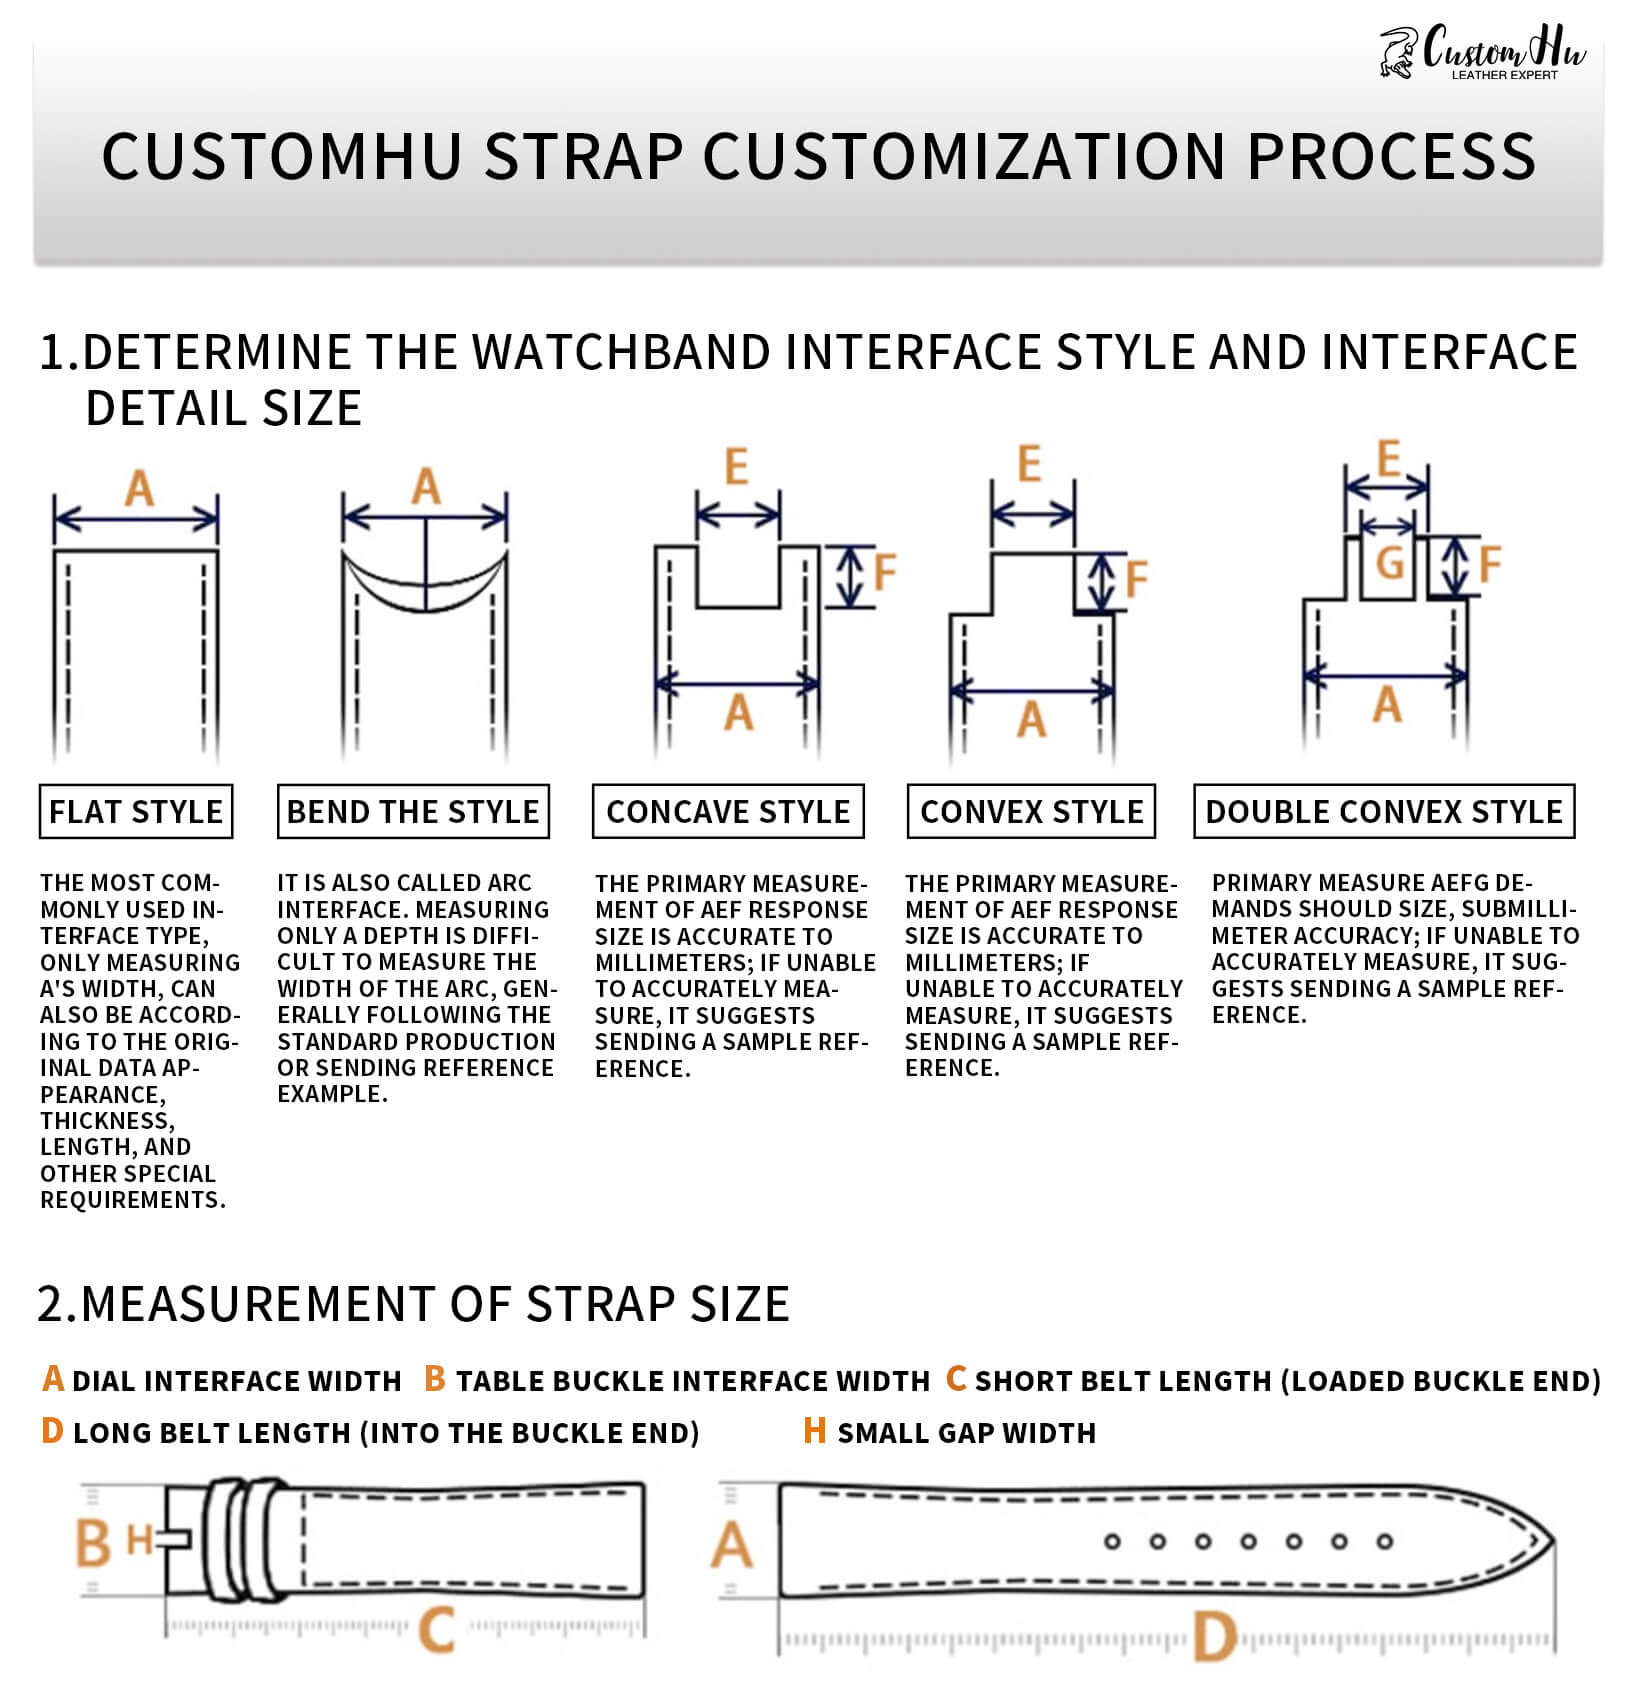 Notes on customizing watch straps